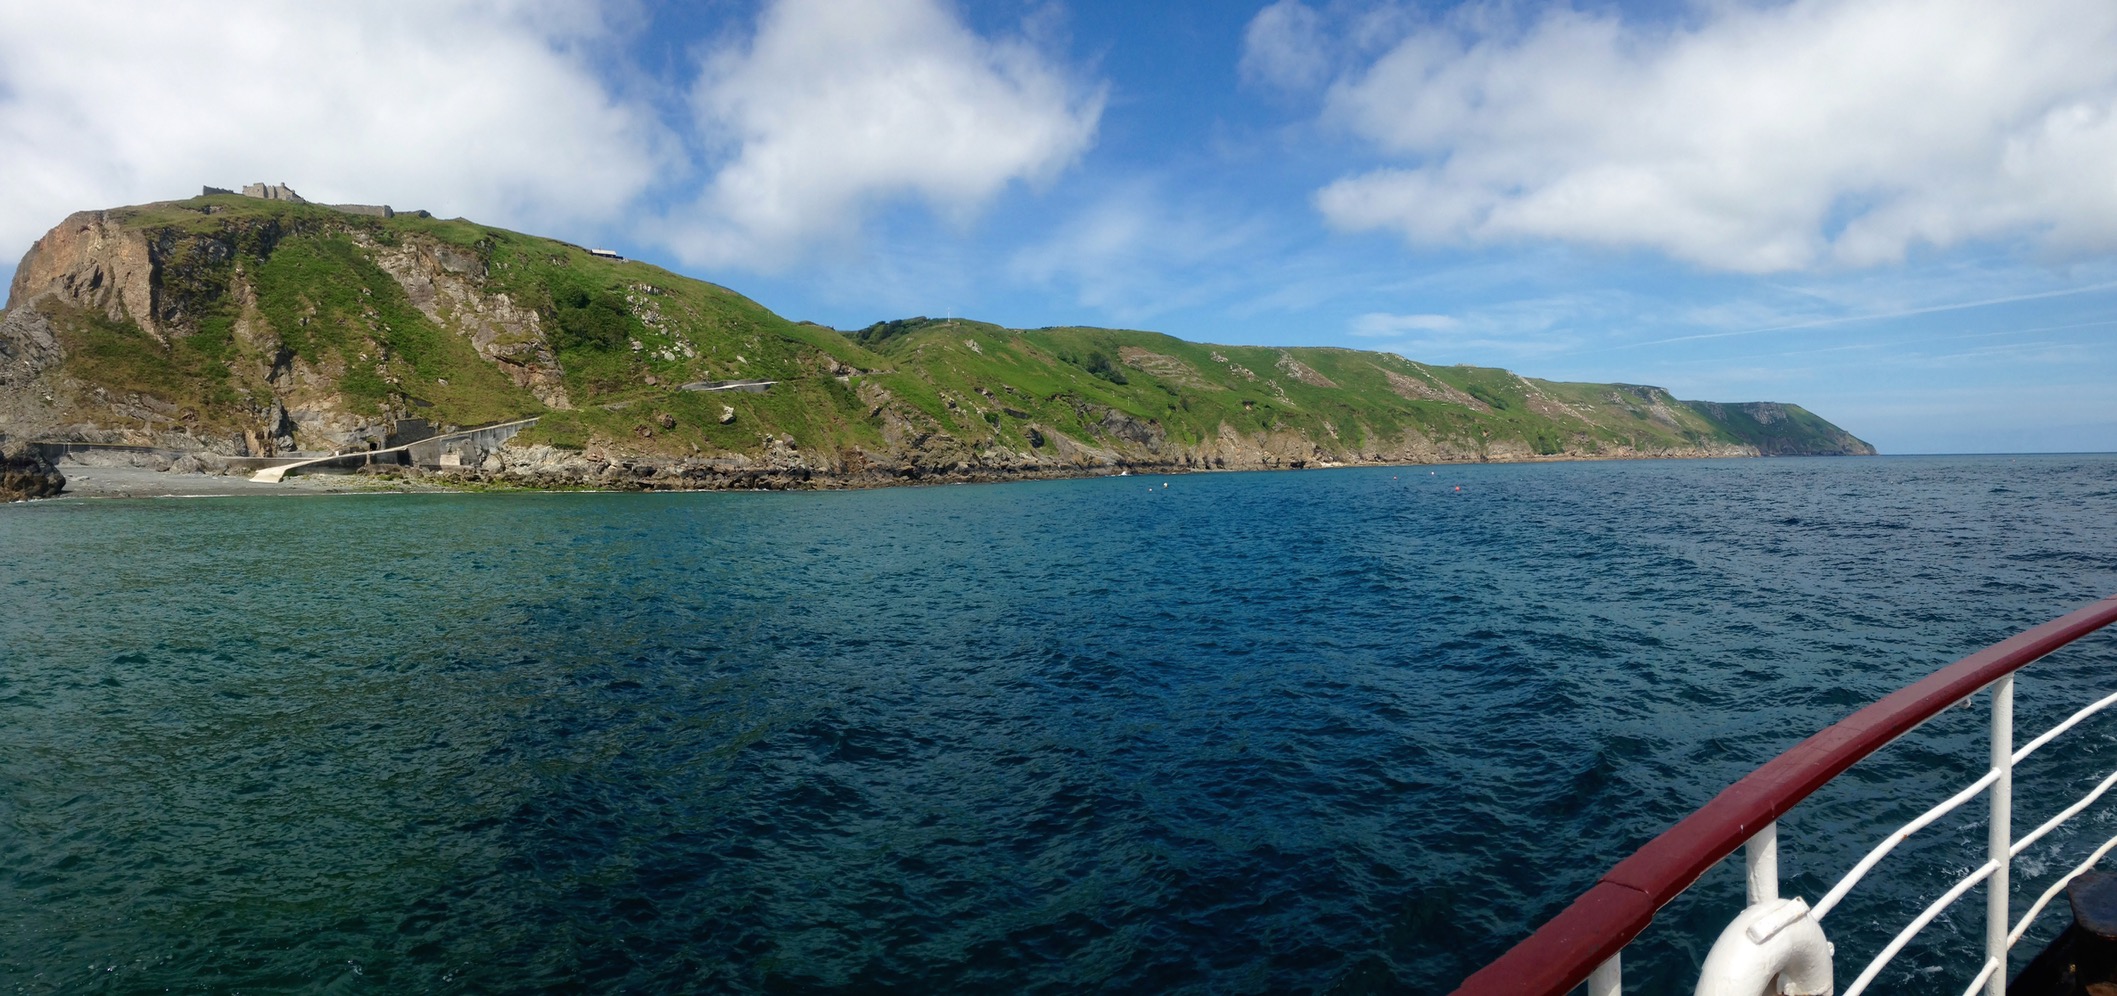 Our first sight of Lundy!